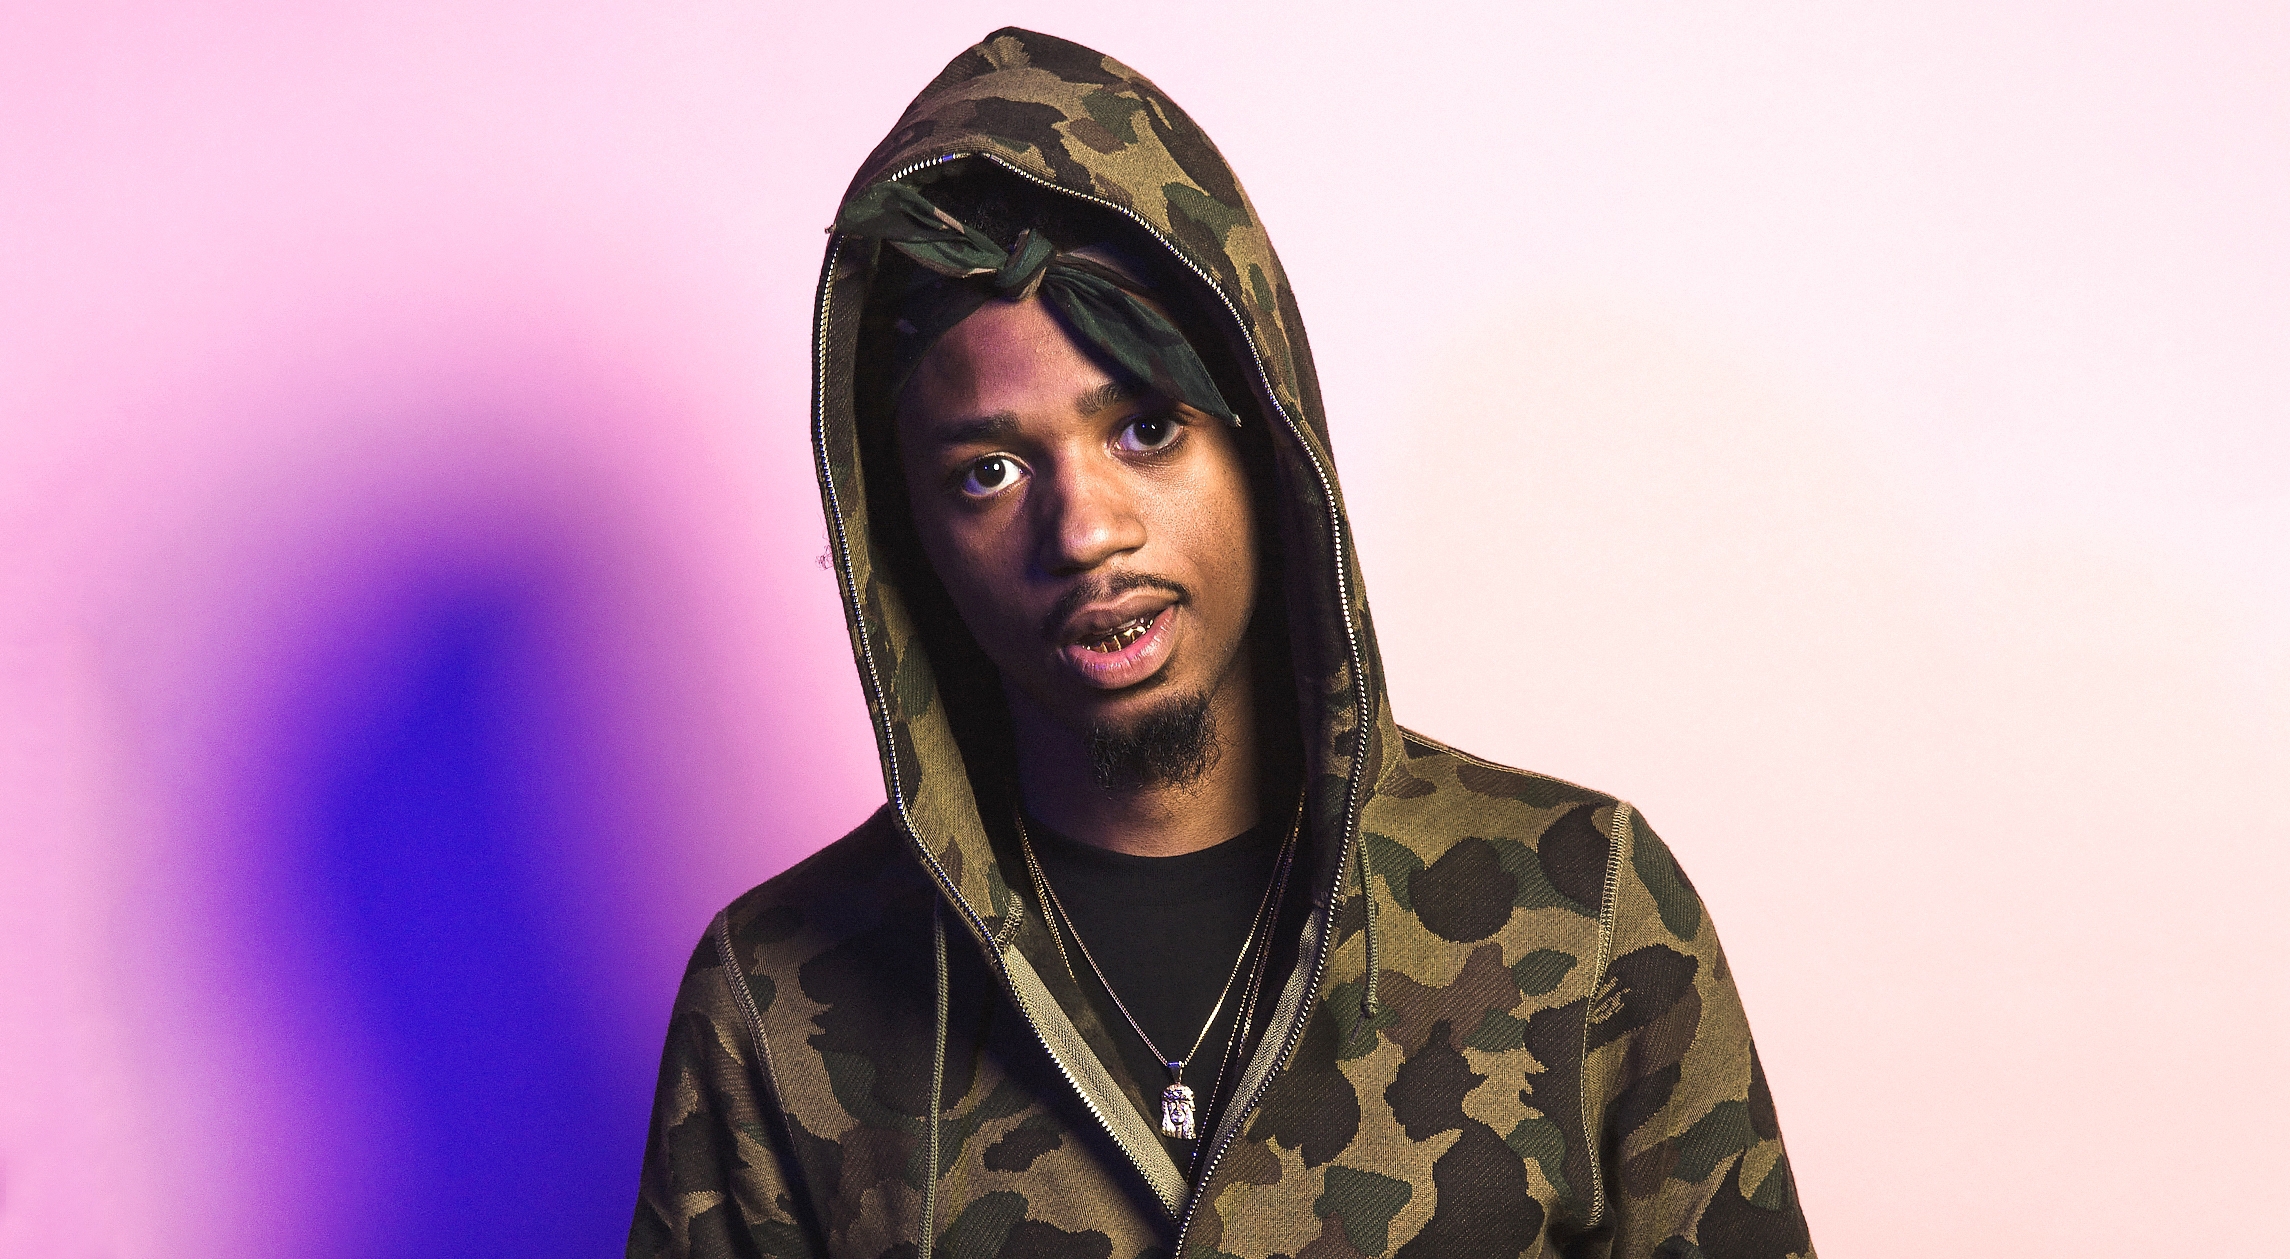 Metro Boomin  Metro Boomin updated their cover photo  Facebook